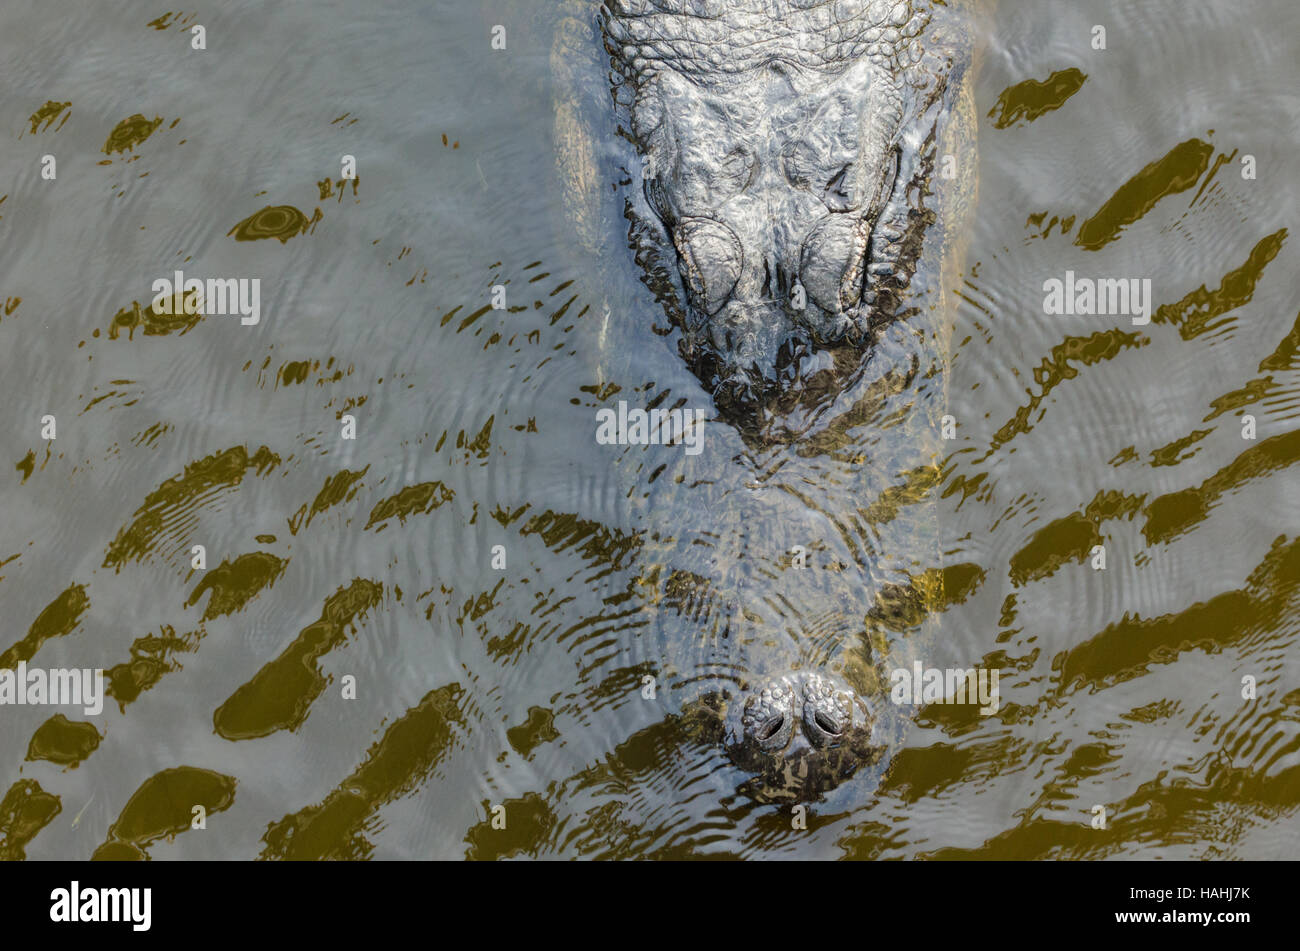 American Alligator with eyes protruding above water surface. Stock Photo